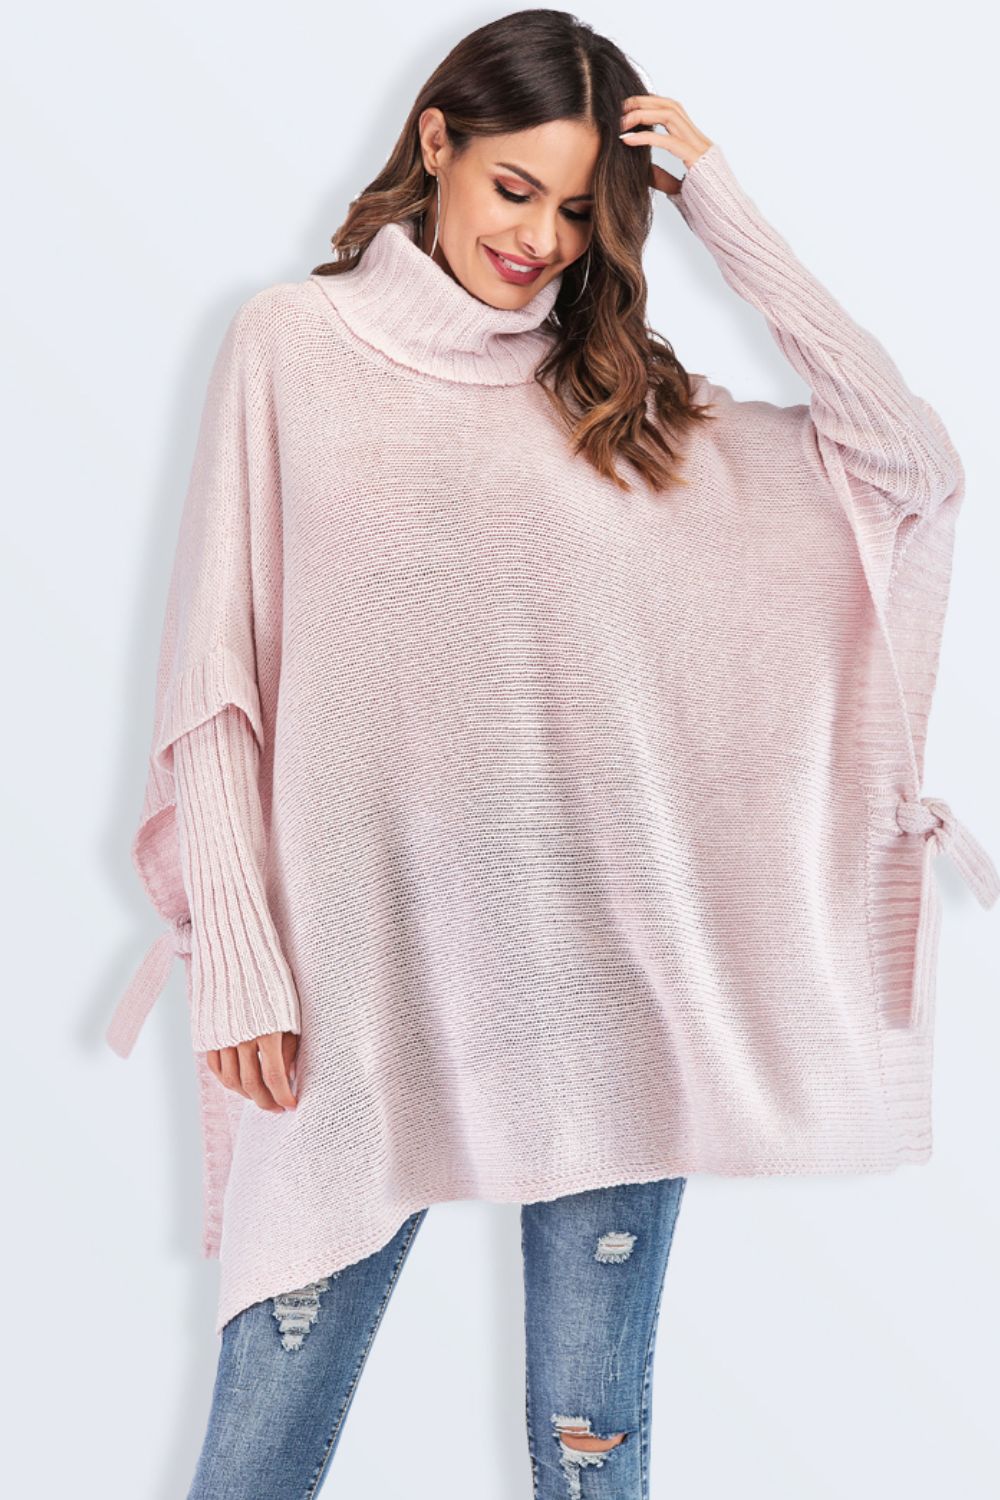 Tied Turtleneck Asymmetrical Hem Sweater Print on any thing USA/STOD clothes